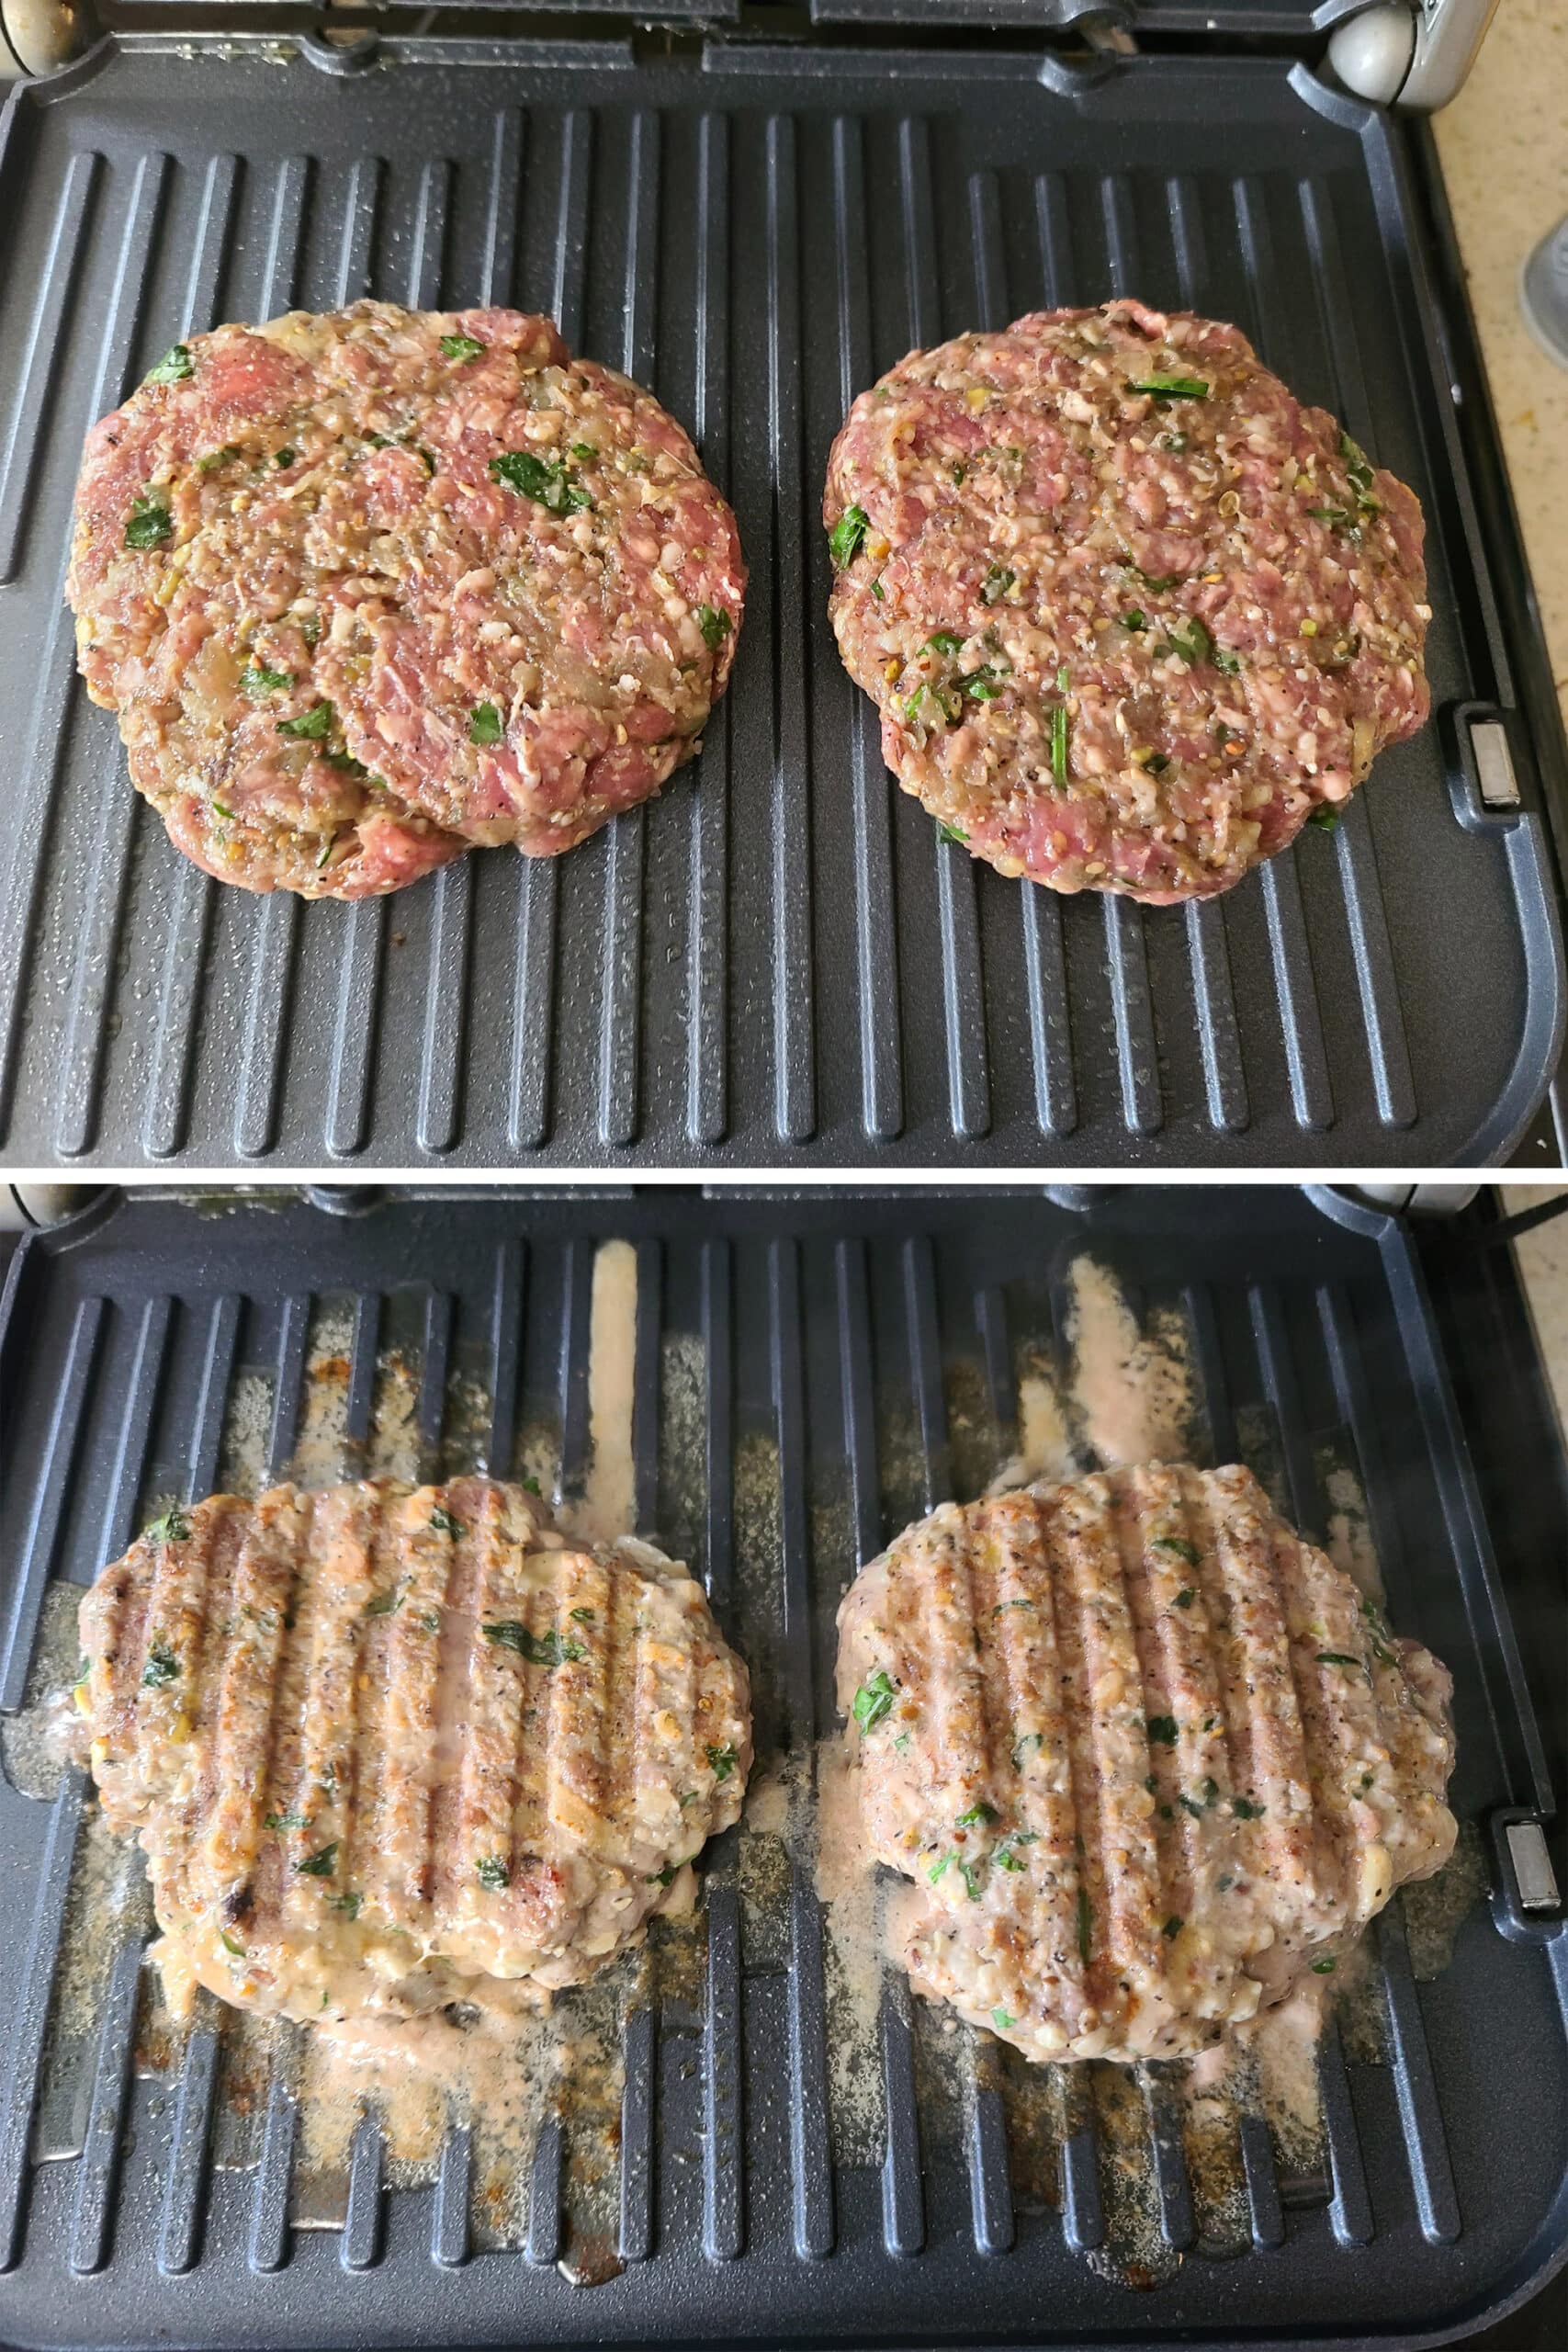 2 part image showing the lamb burger patties cooking on an indoor grill.